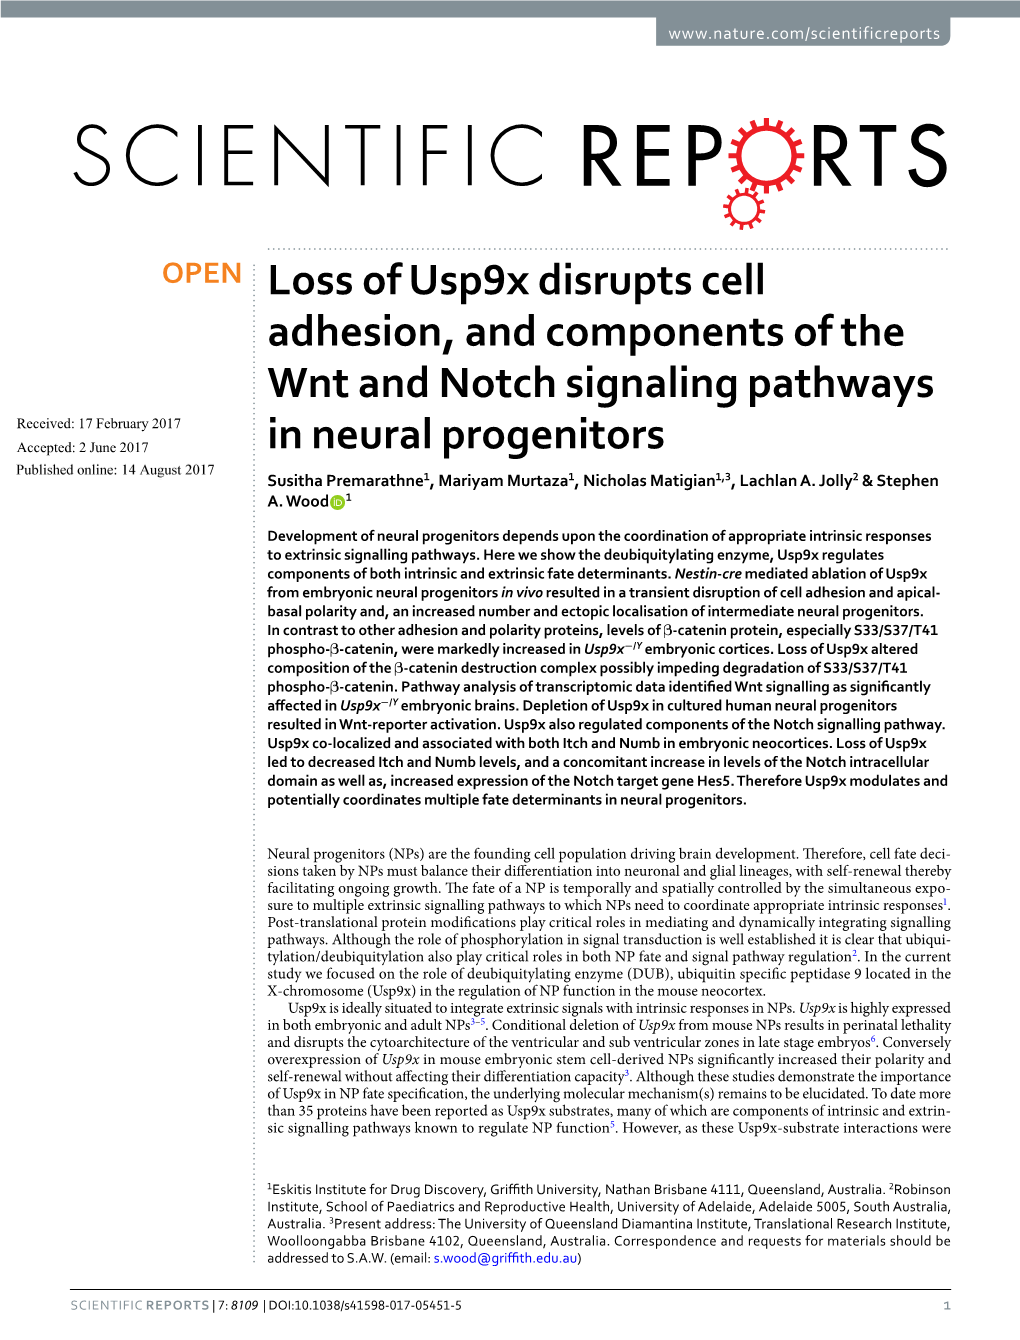 Loss of Usp9x Disrupts Cell Adhesion, and Components of the Wnt And